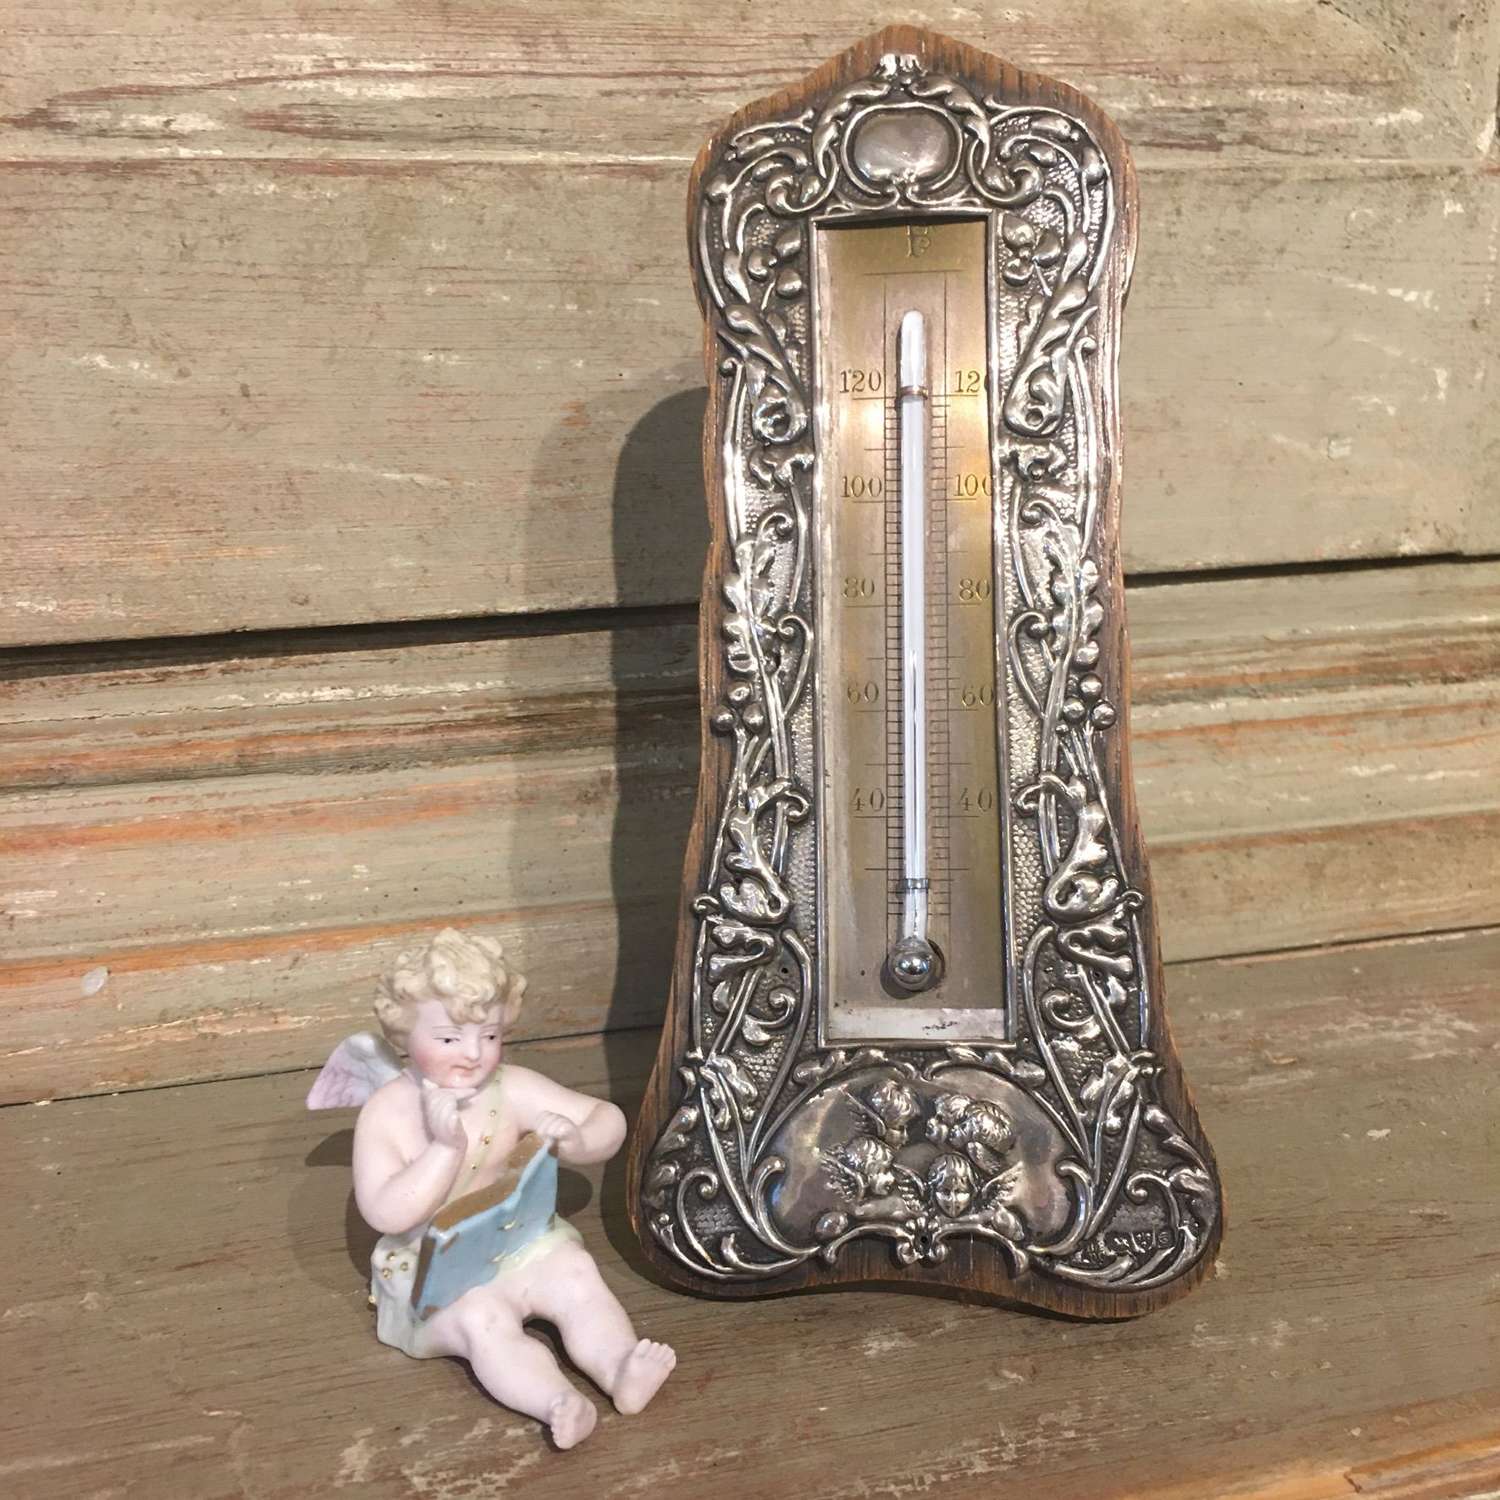 An antique silver thermometer d 1904 with cherub design